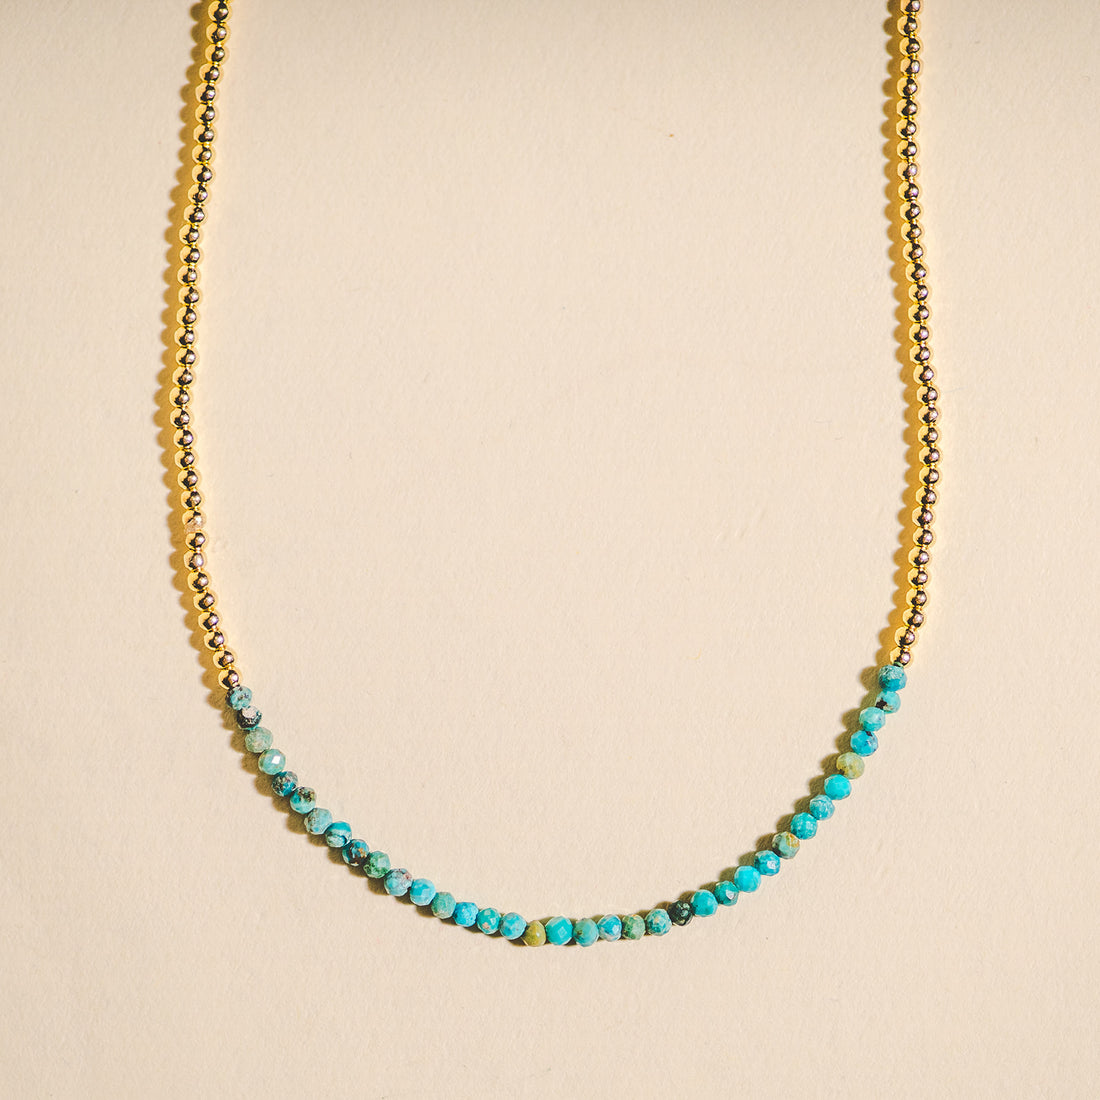 Beaded Crystal Necklace - Gold with Turquoise